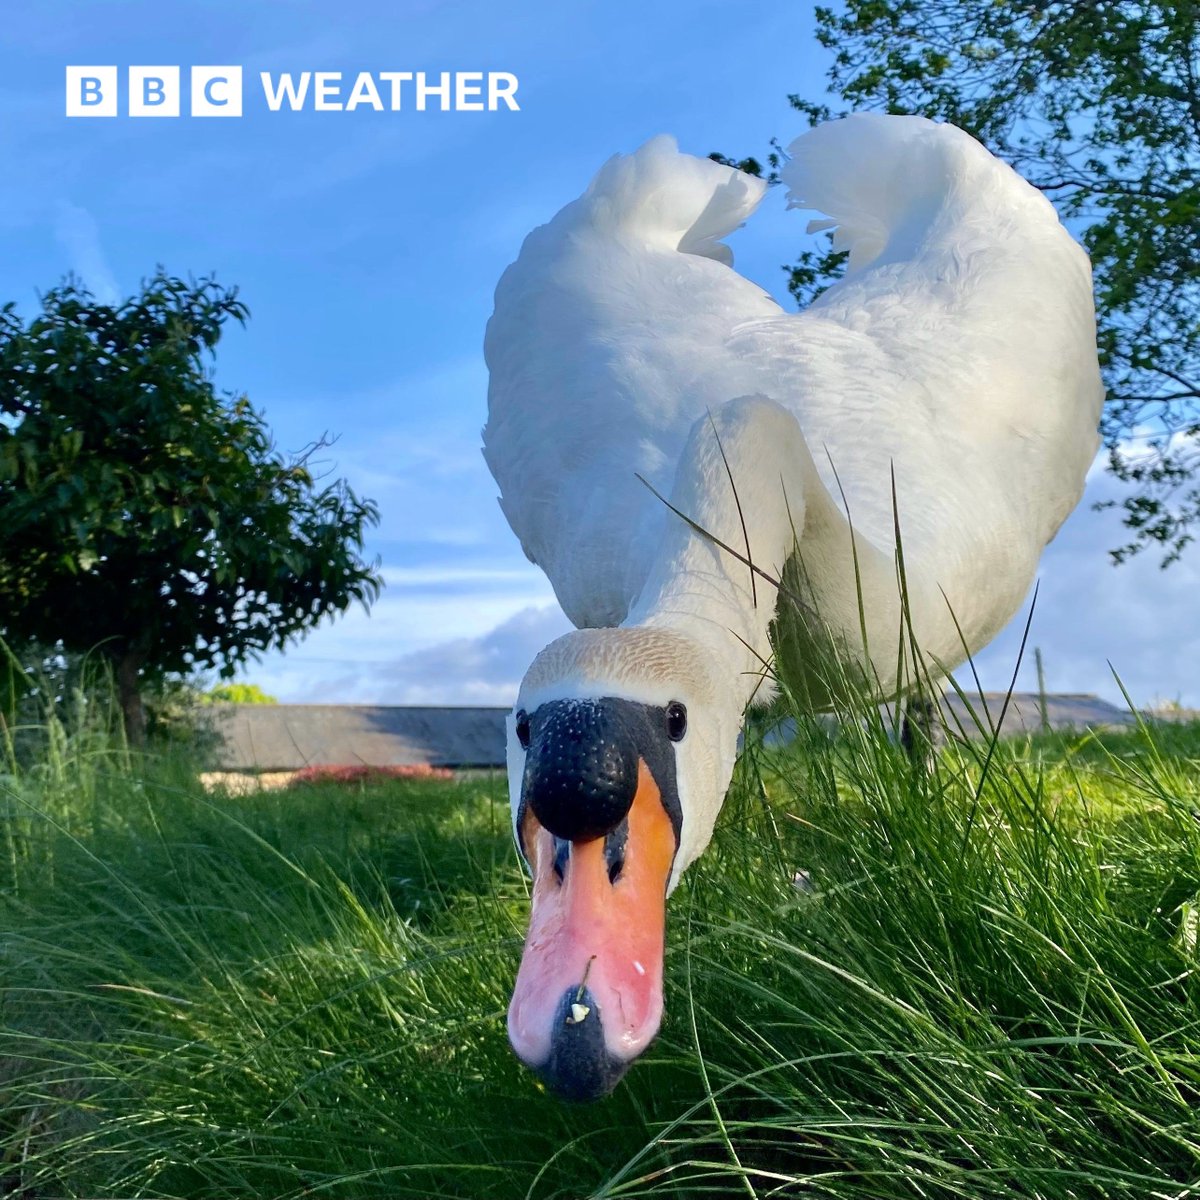 Swanning about on a sunny day in Bedfordshire. Thanks to our BBC Weather Watcher niknak1970. #Sunshine #UKWeather